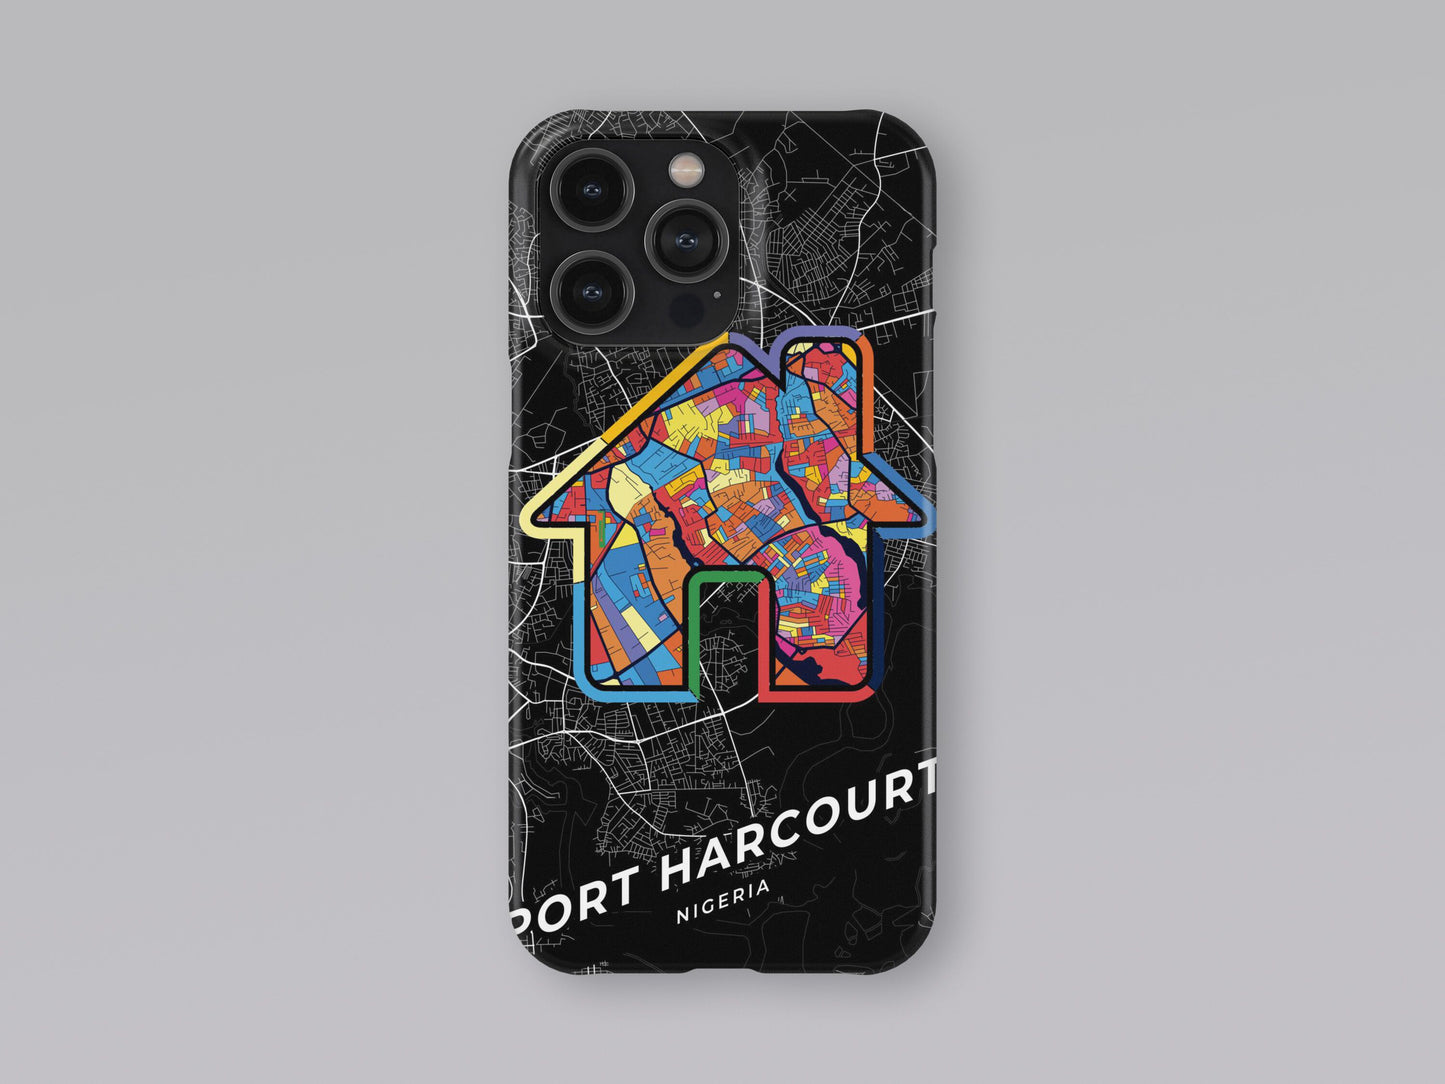 Port Harcourt Nigeria slim phone case with colorful icon 3